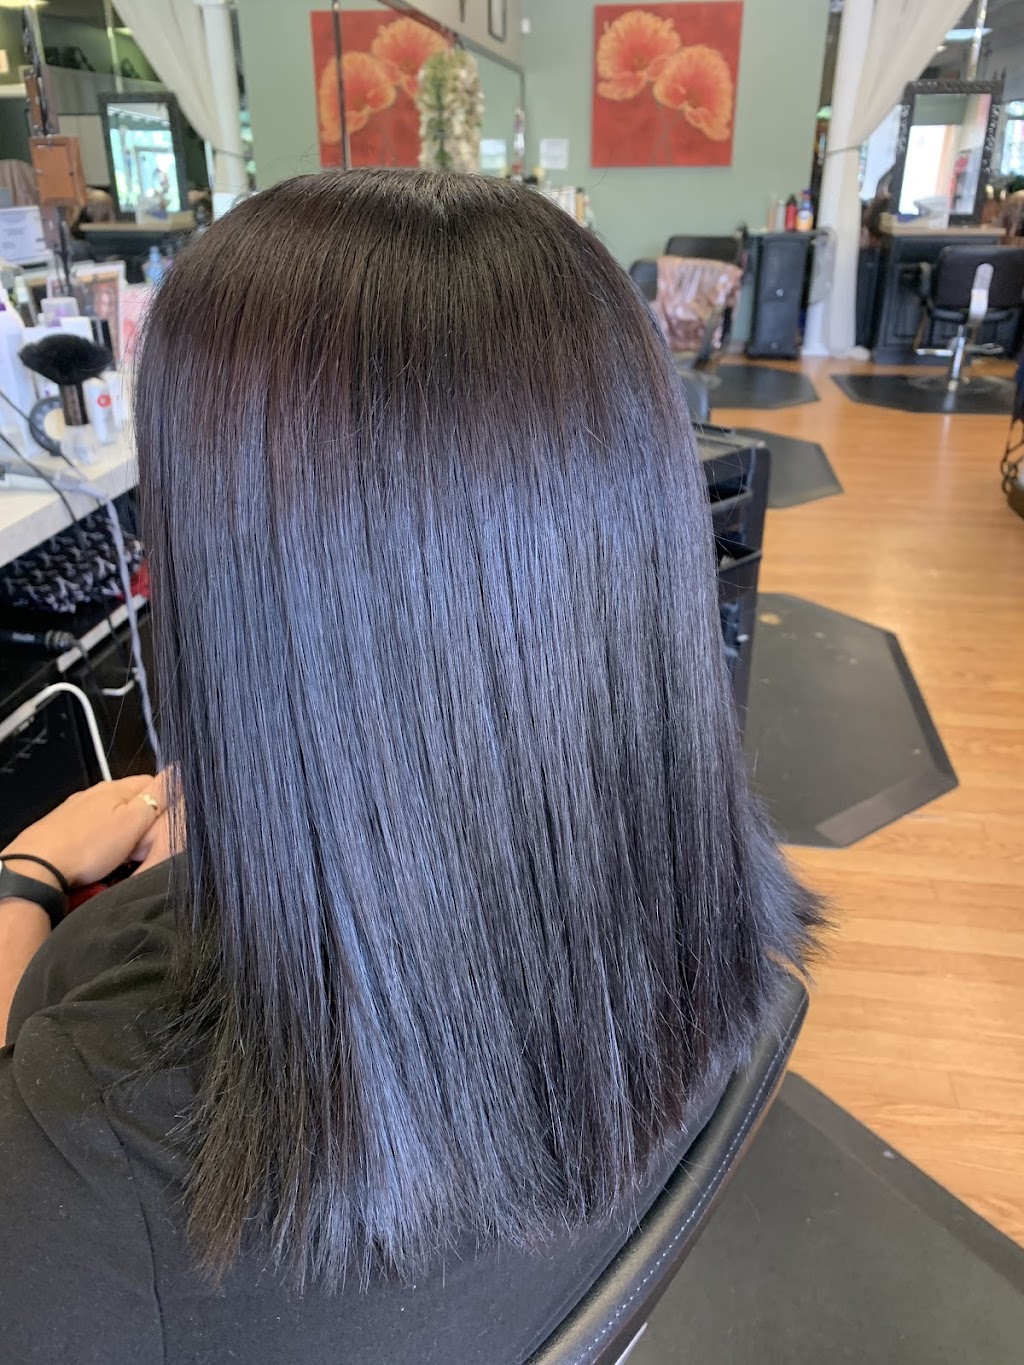 Beautiful by Angie | 5561 Portsmouth Blvd, Portsmouth, VA 23701 | Phone: (757) 644-9163